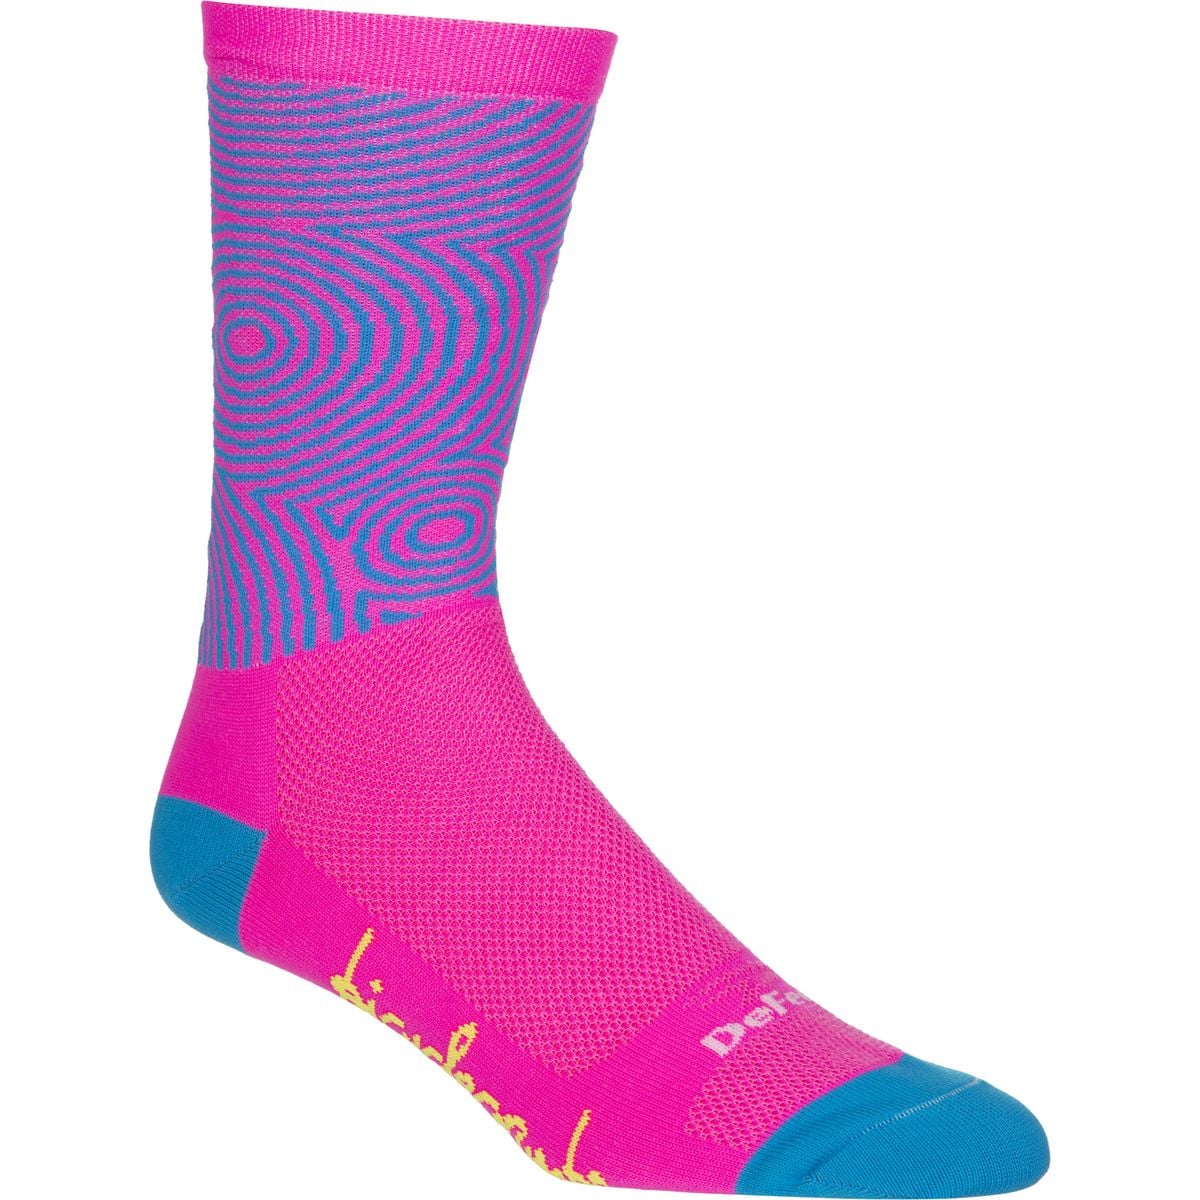 DeFeet Bicycle Crumbs Concentric Circles 6in Sock Men's